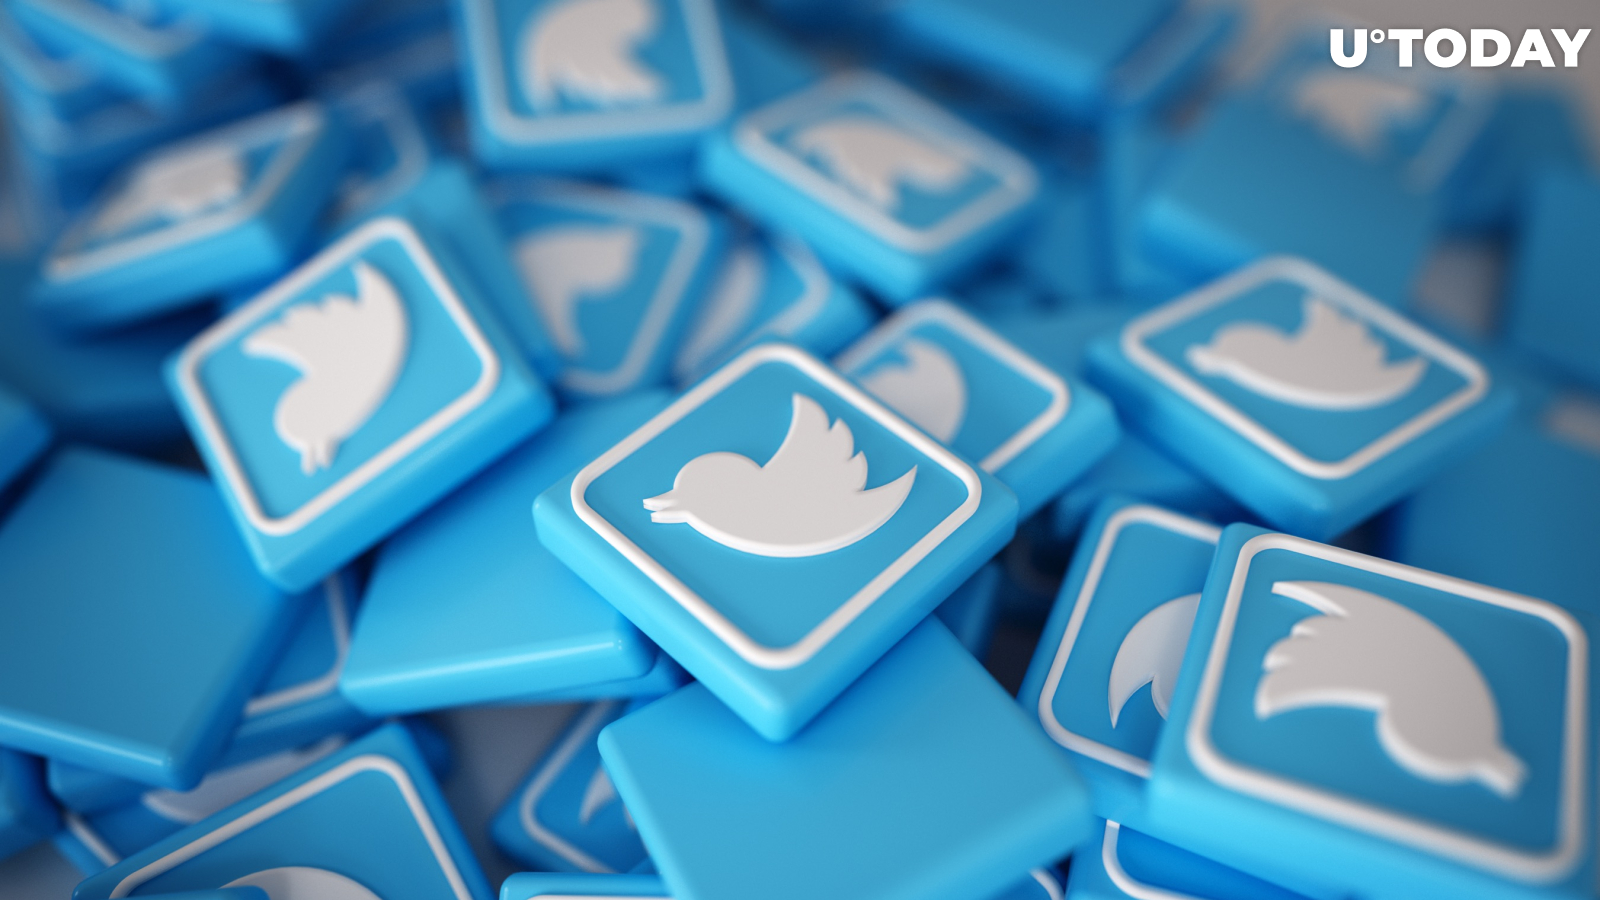 Twitter Preparing to Launch New “Coins” Feature  